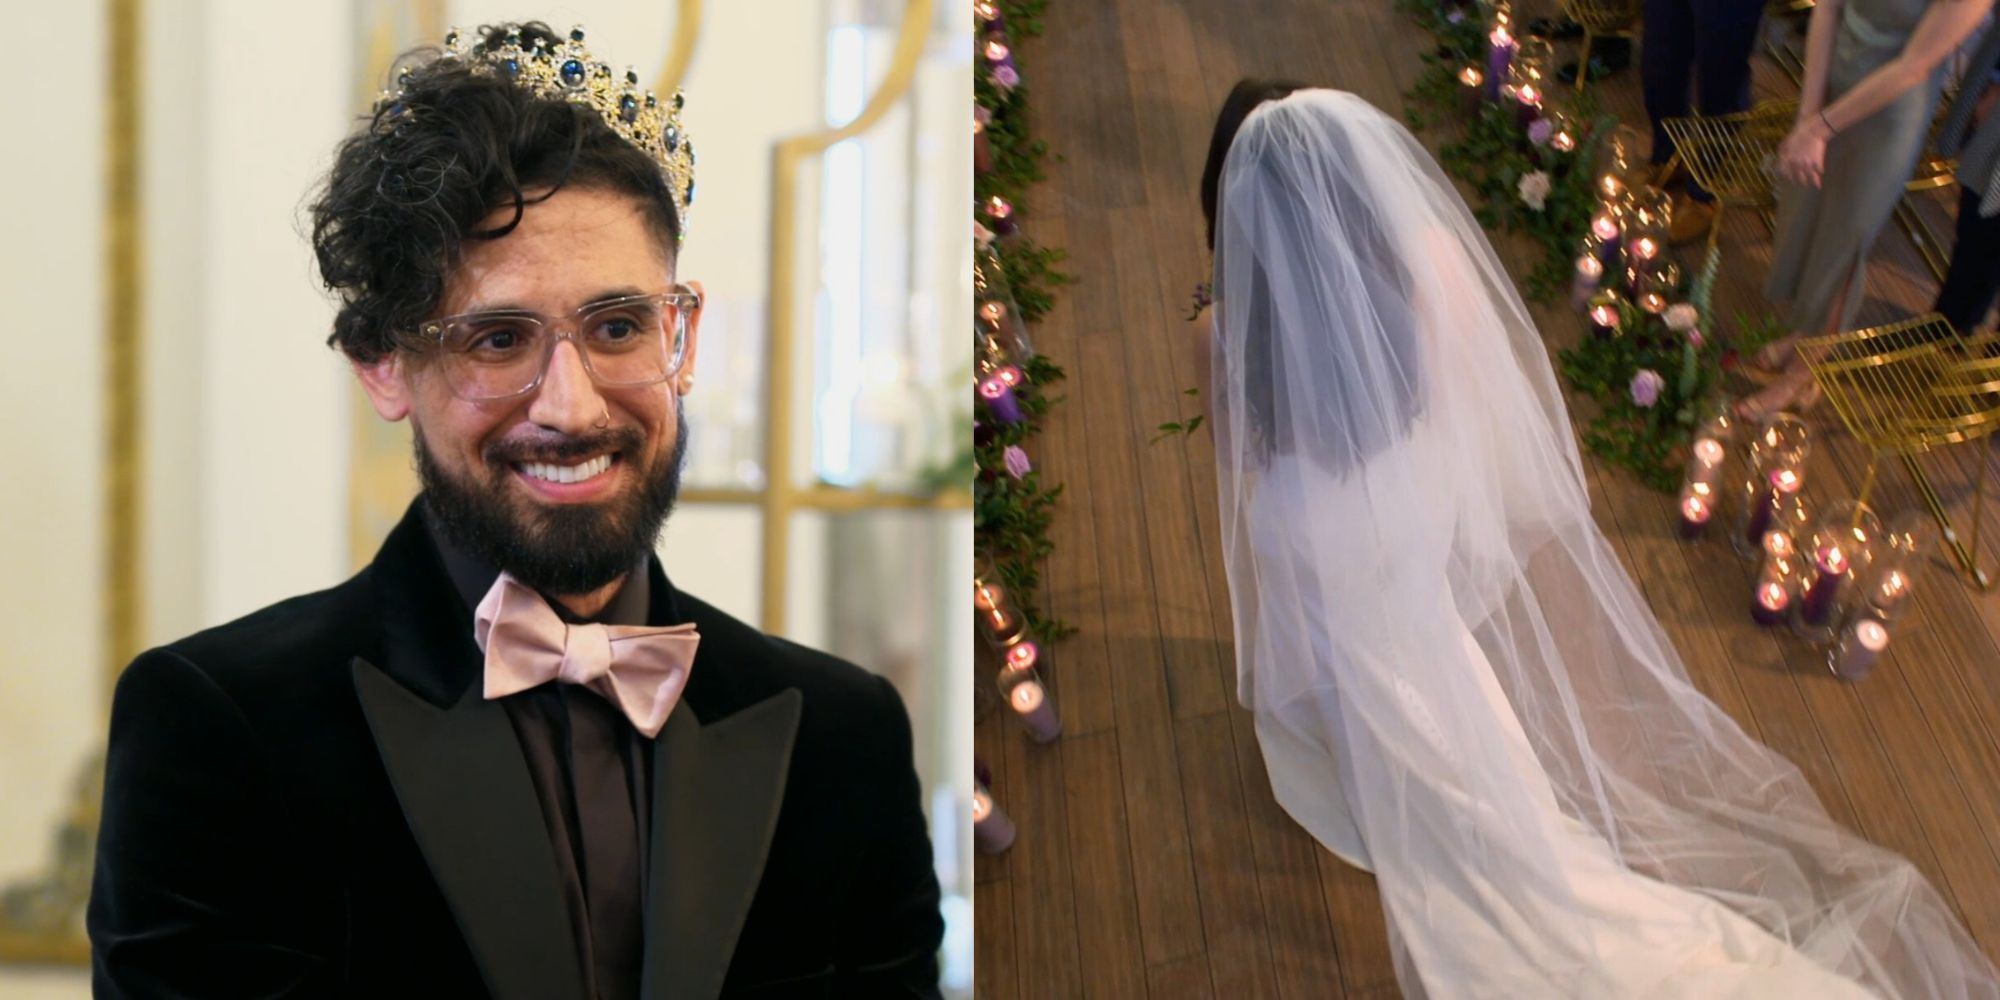 Michael Married At First Sight Season 17 and runaway bride